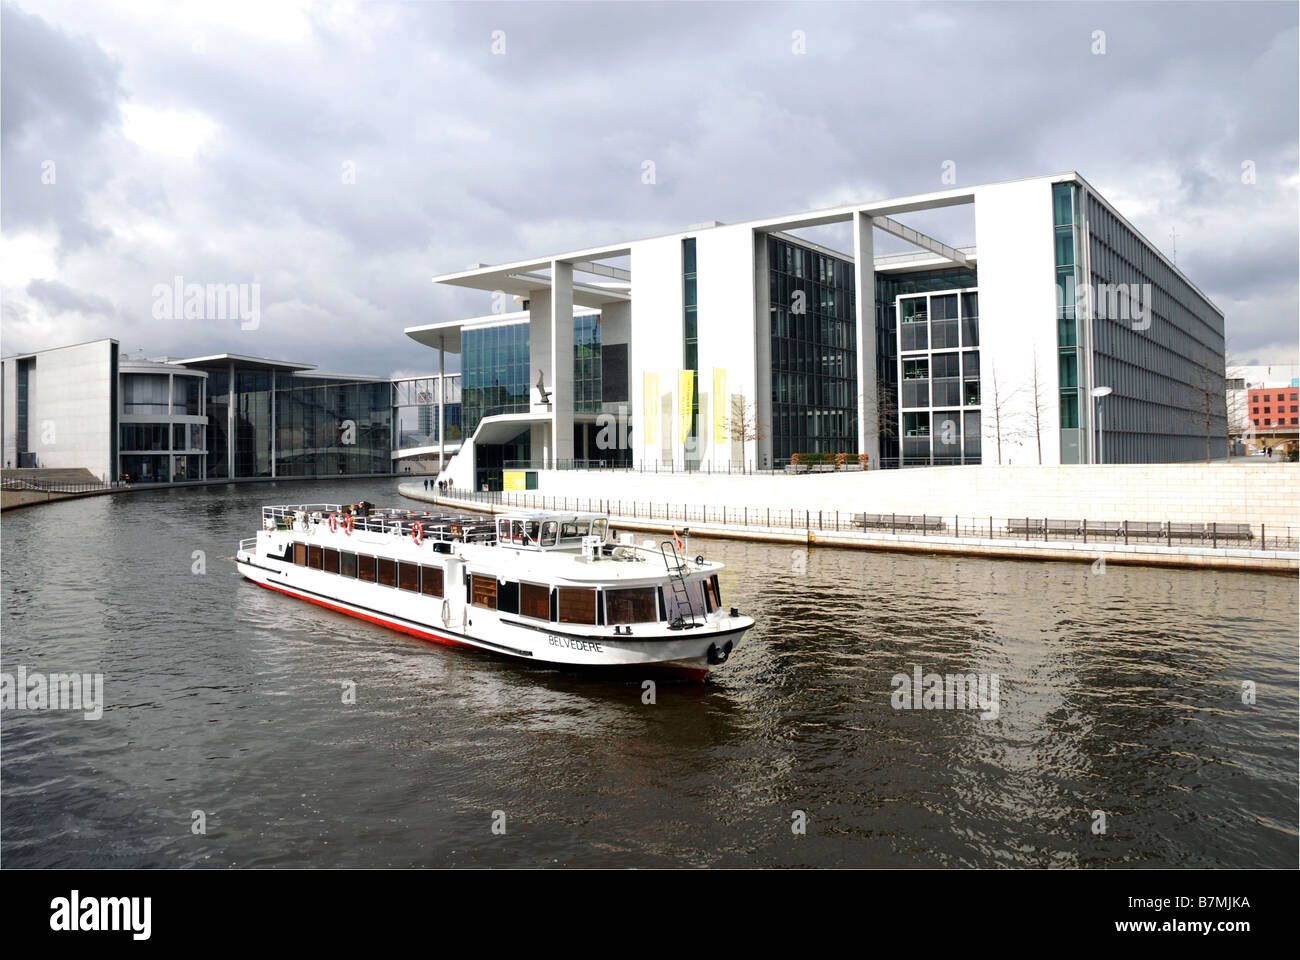 Sightseeing on the river Spree, Government District, Berlin Stock Photo